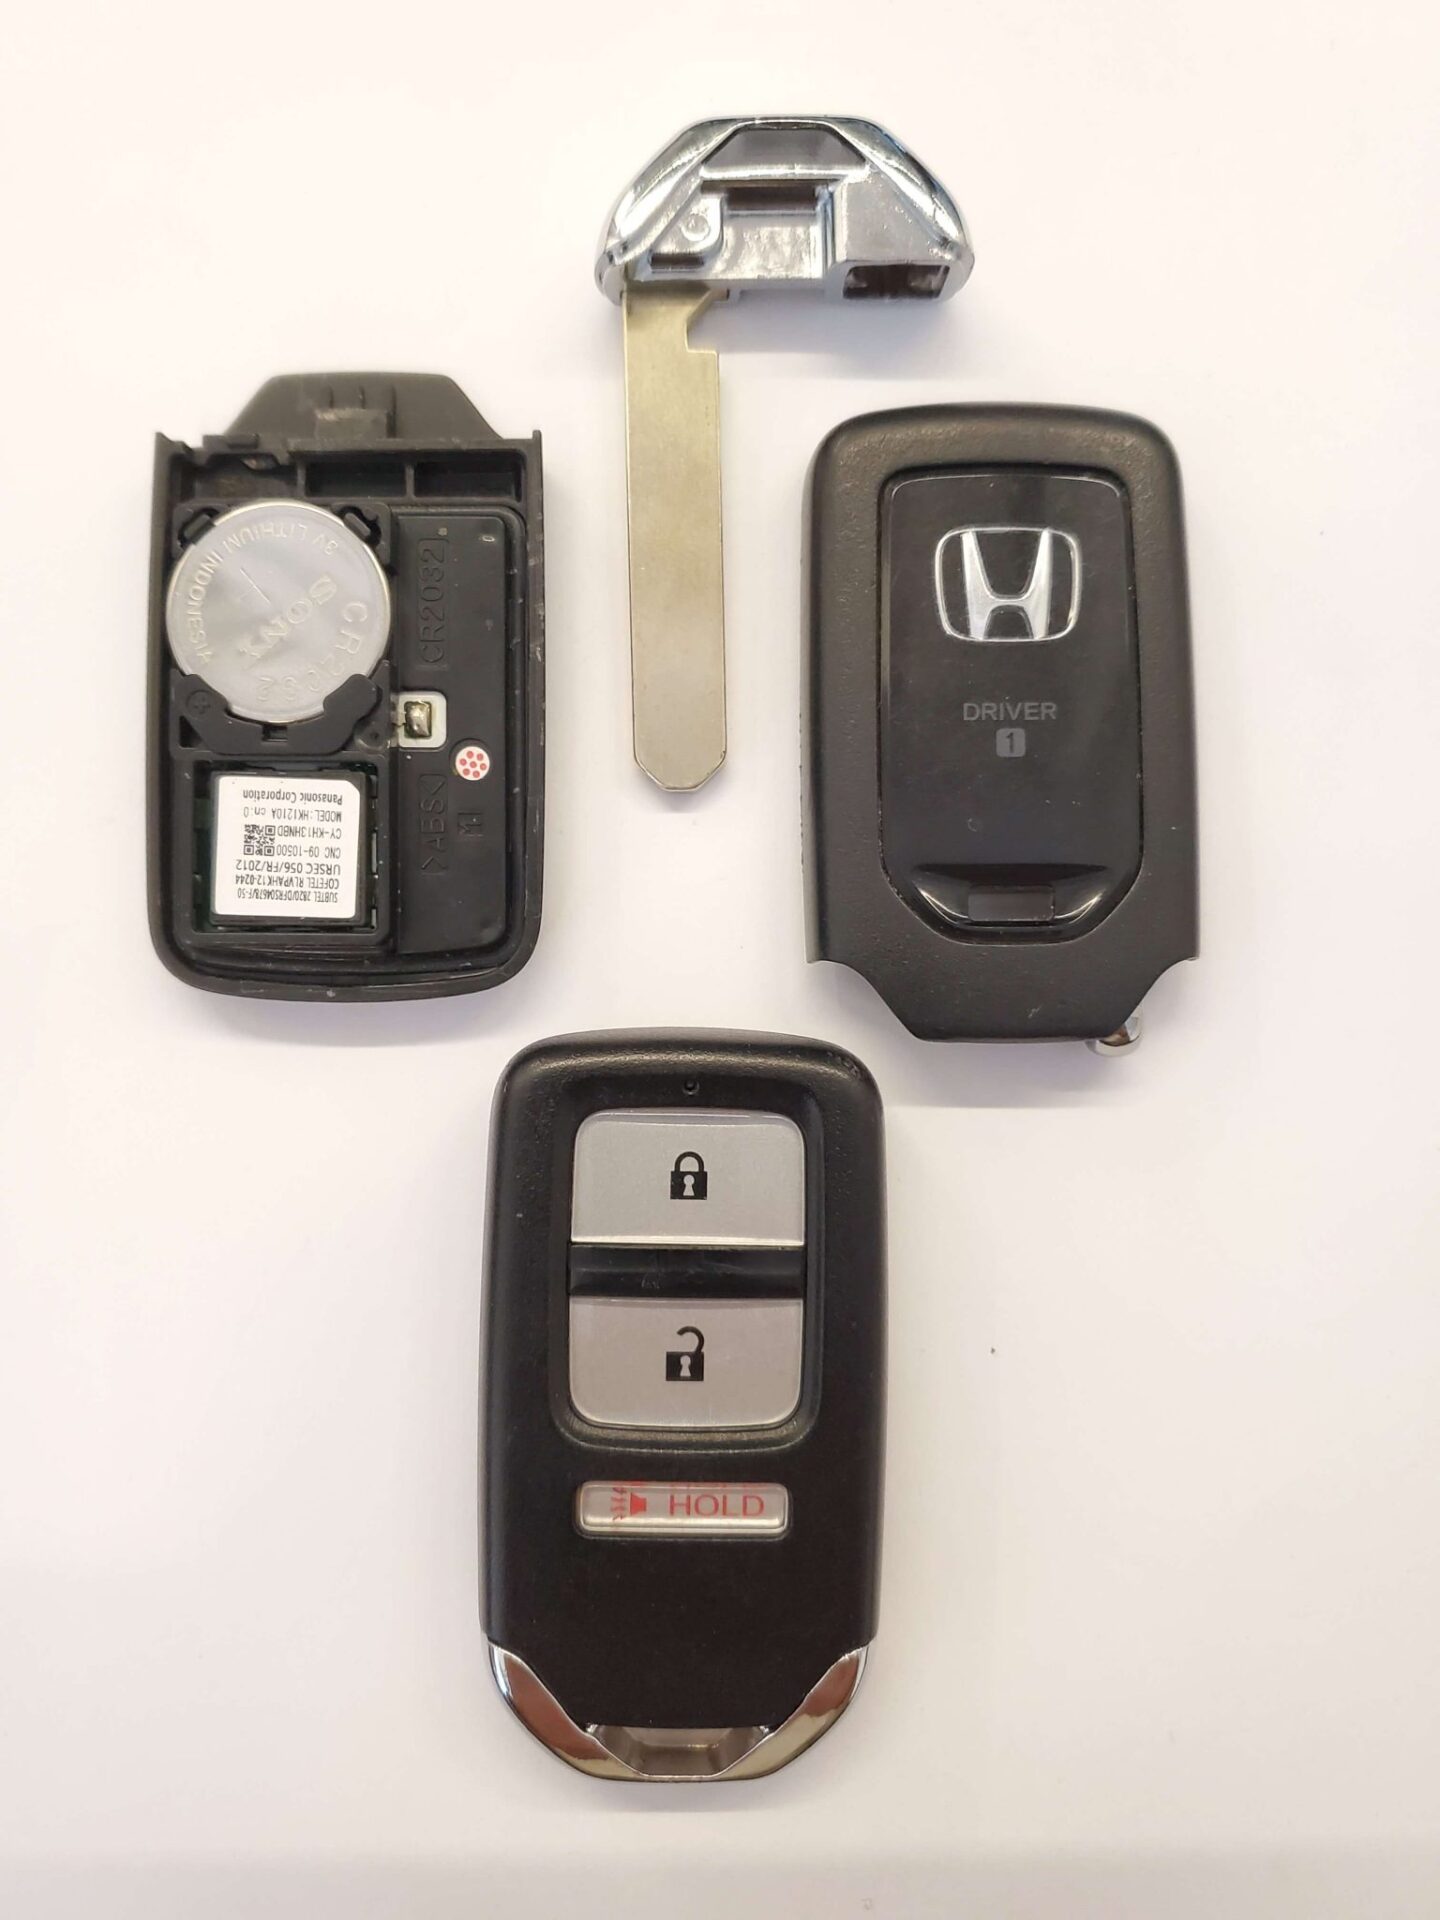 Lost Honda Car Key Replacement What To Do, Options, Costs & More